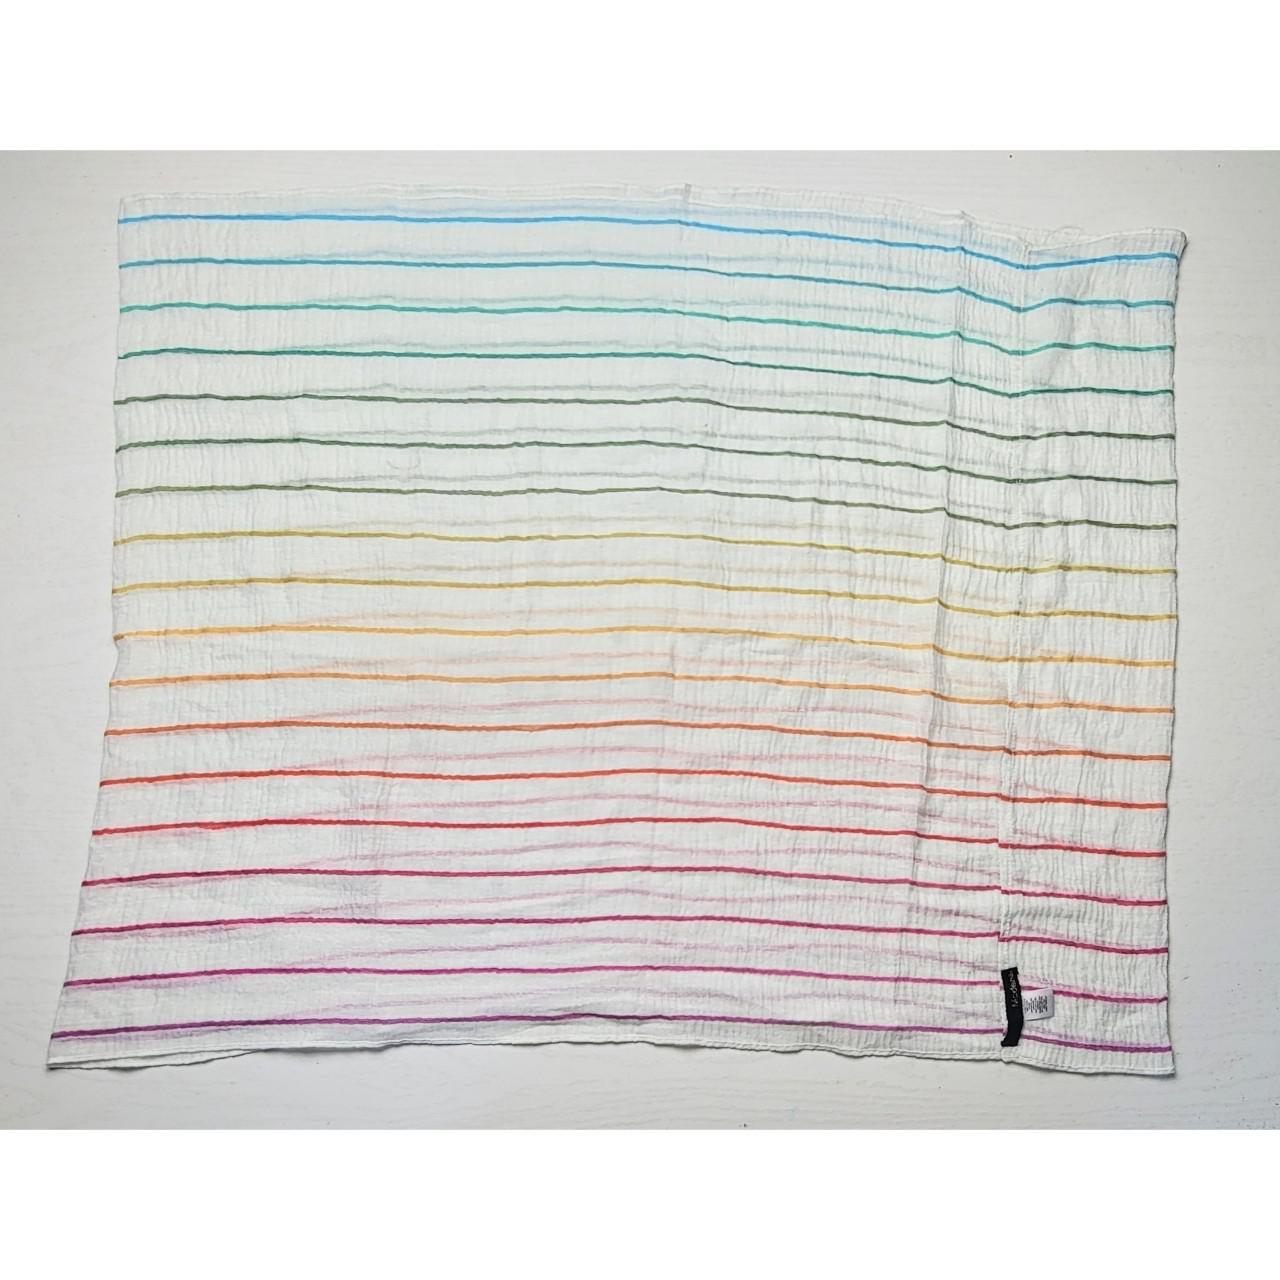 Product Image 2 - Rainbow striped infinity scarf

White and